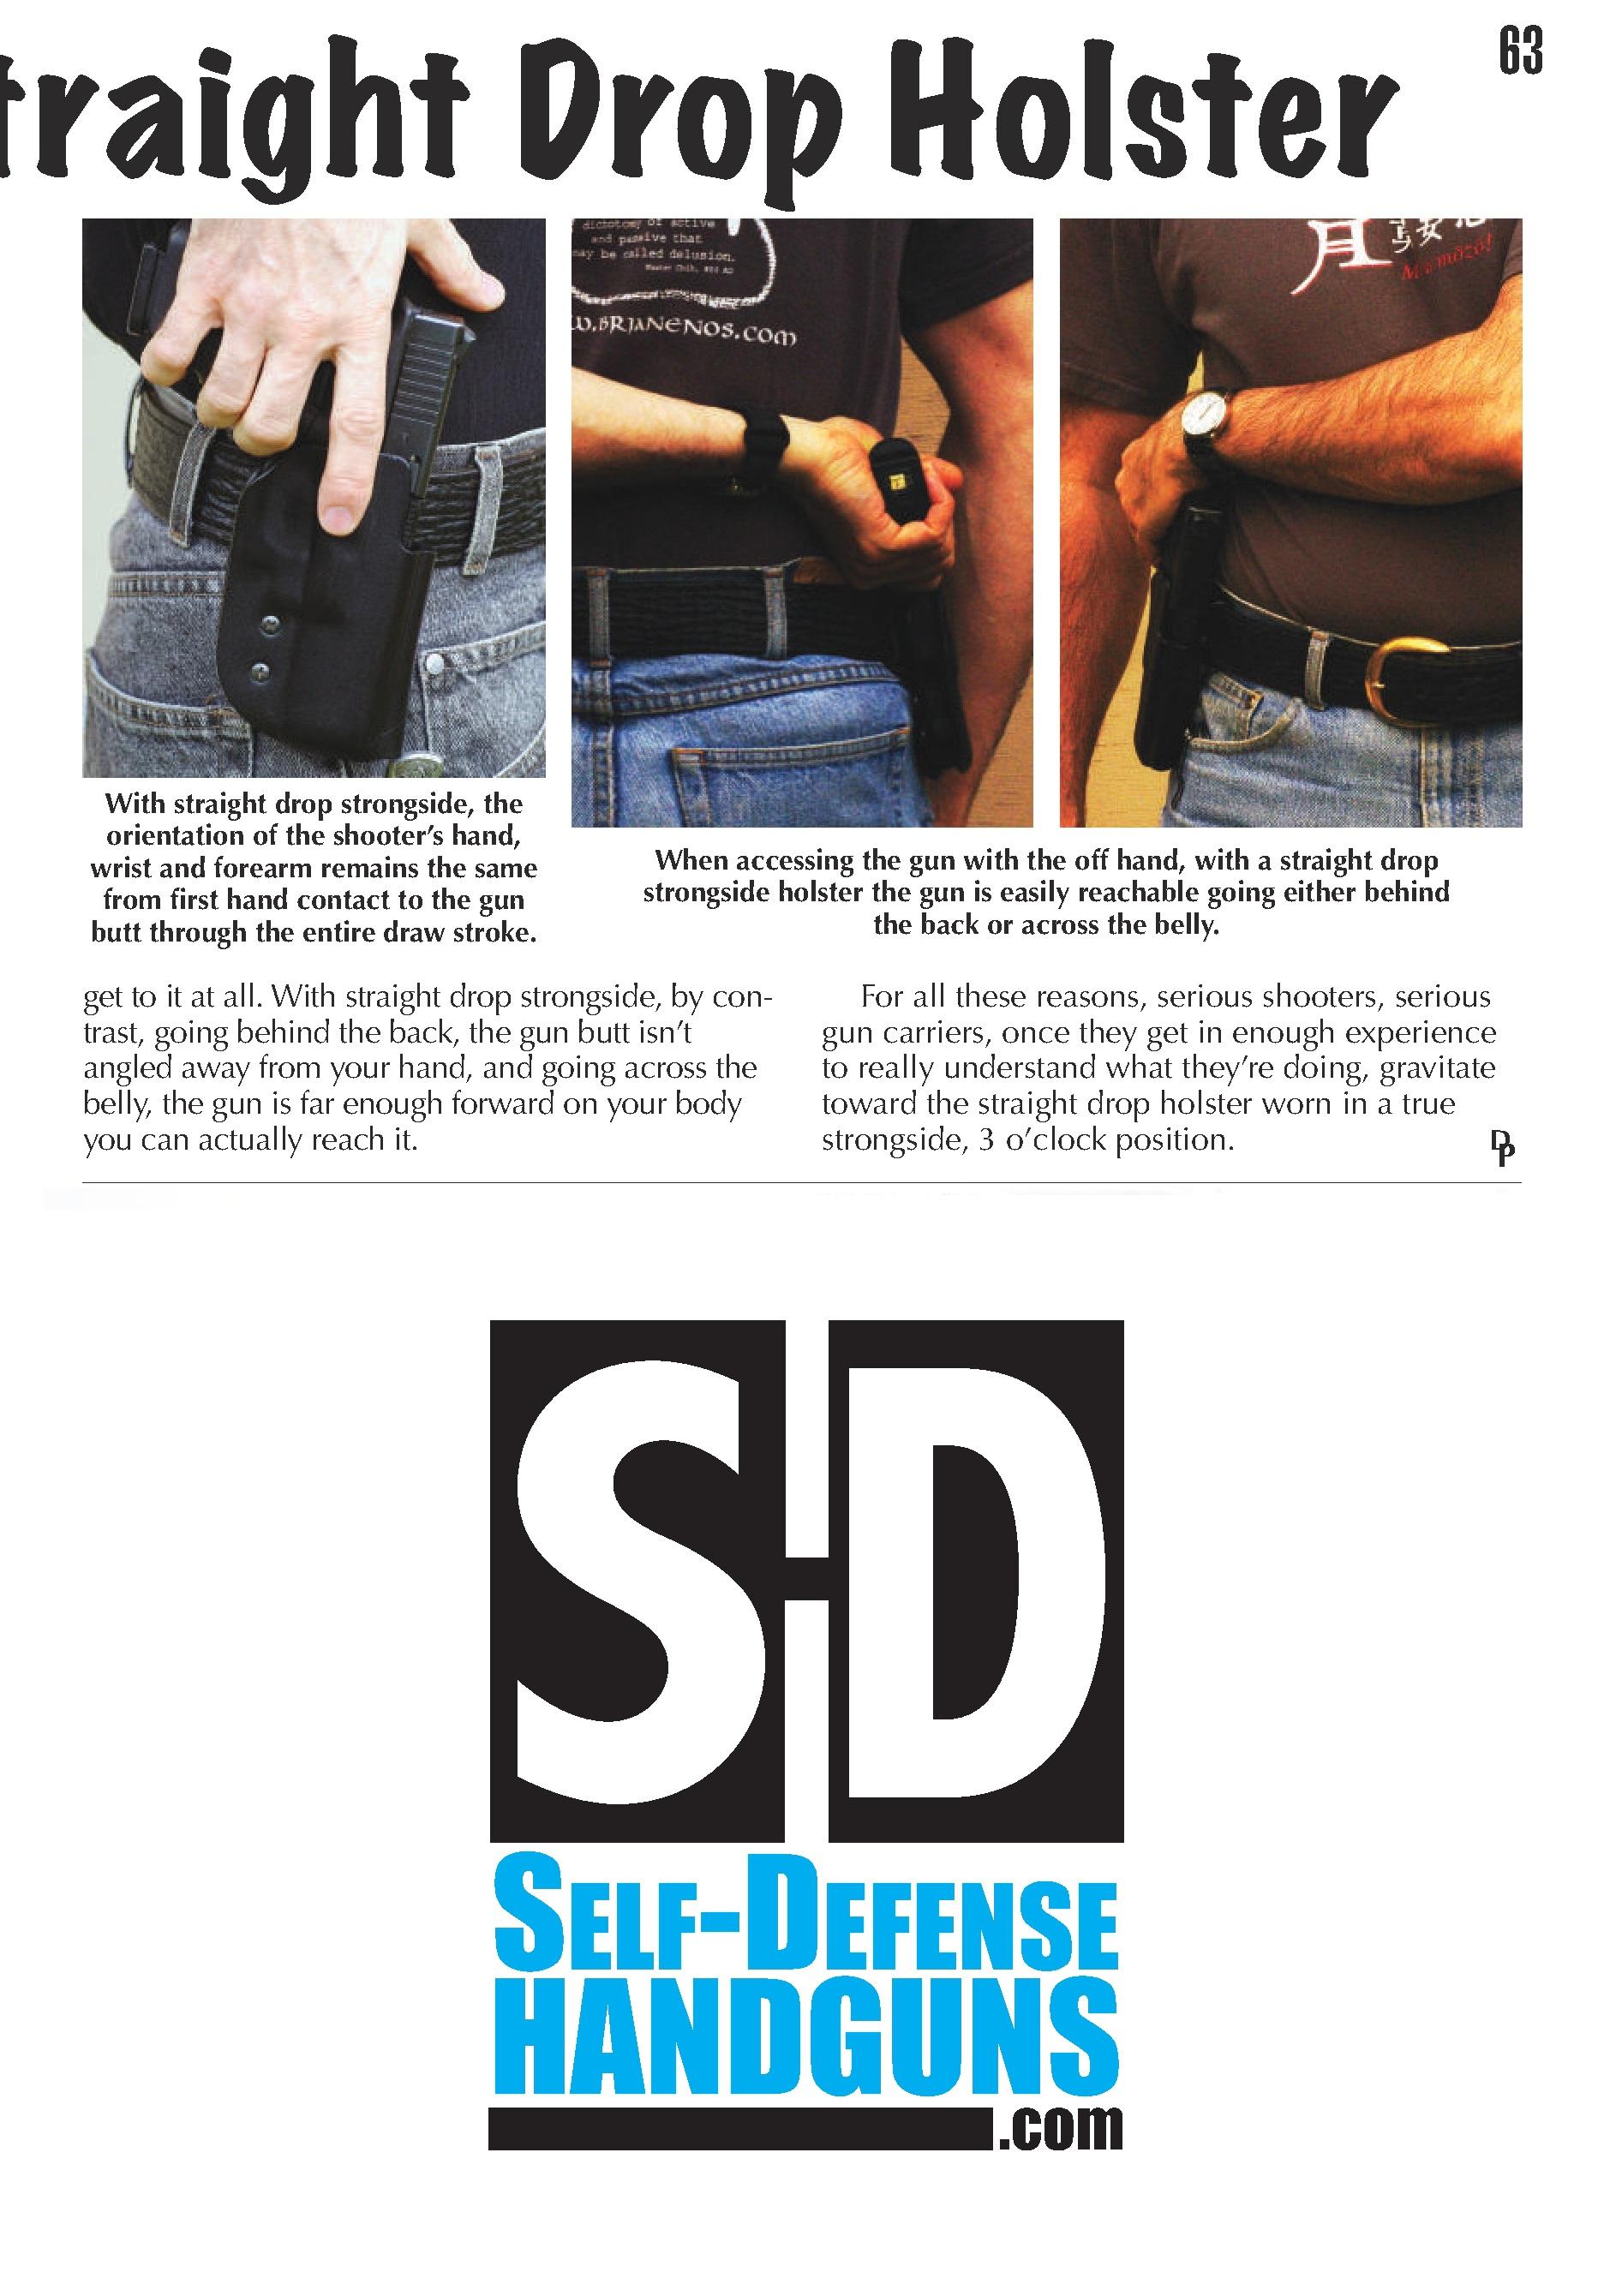 Straight Drop Logo - The Case for the Straight Drop Holster